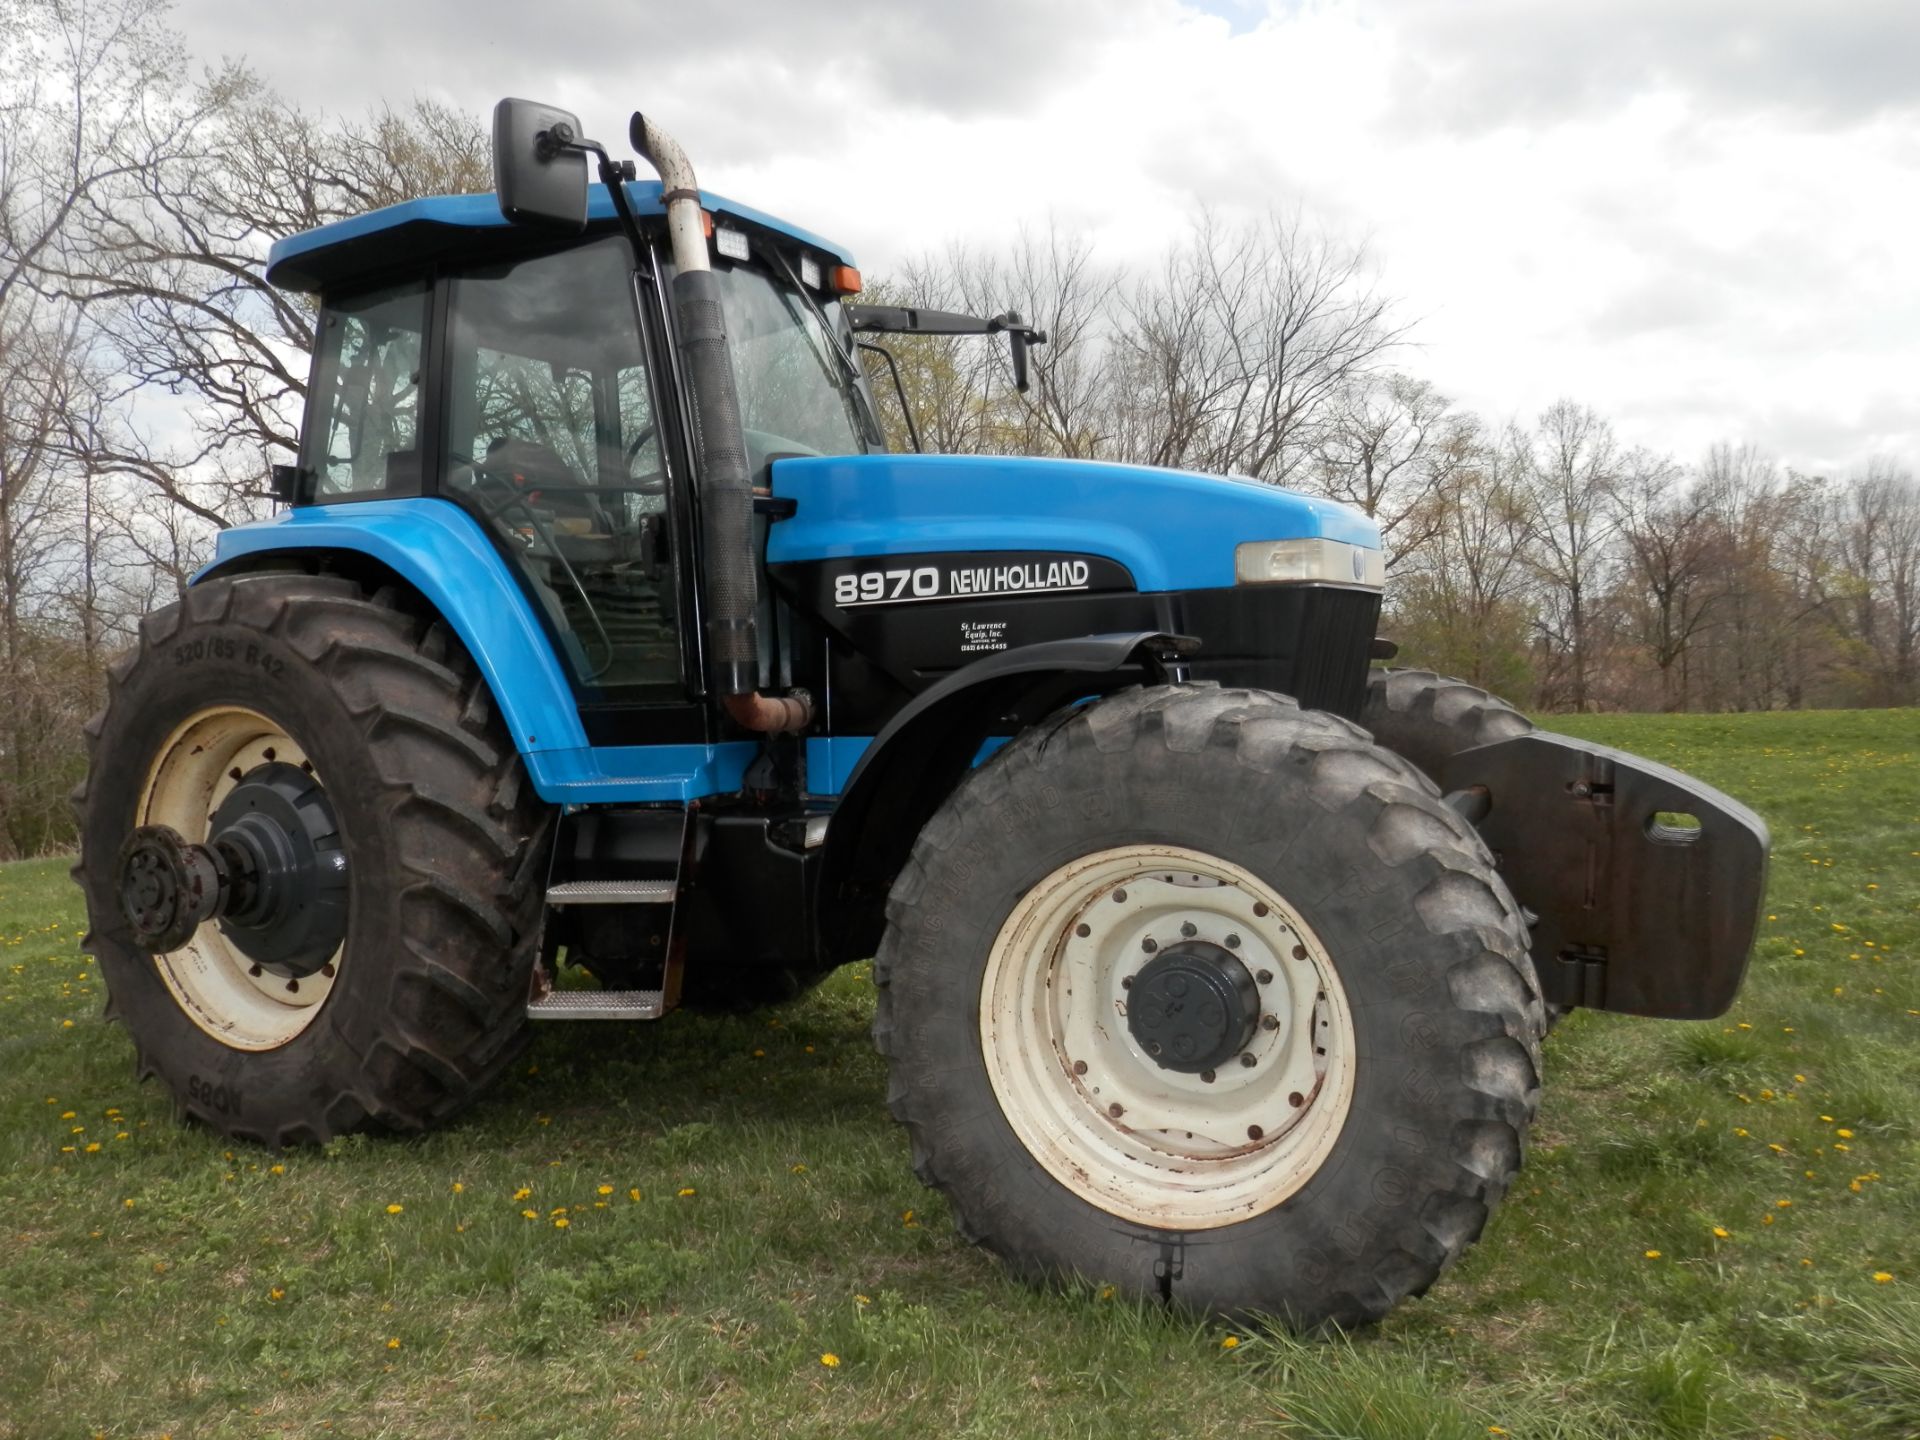 NEW HOLLAND 8970 MFWD TRACTOR SN: D420671